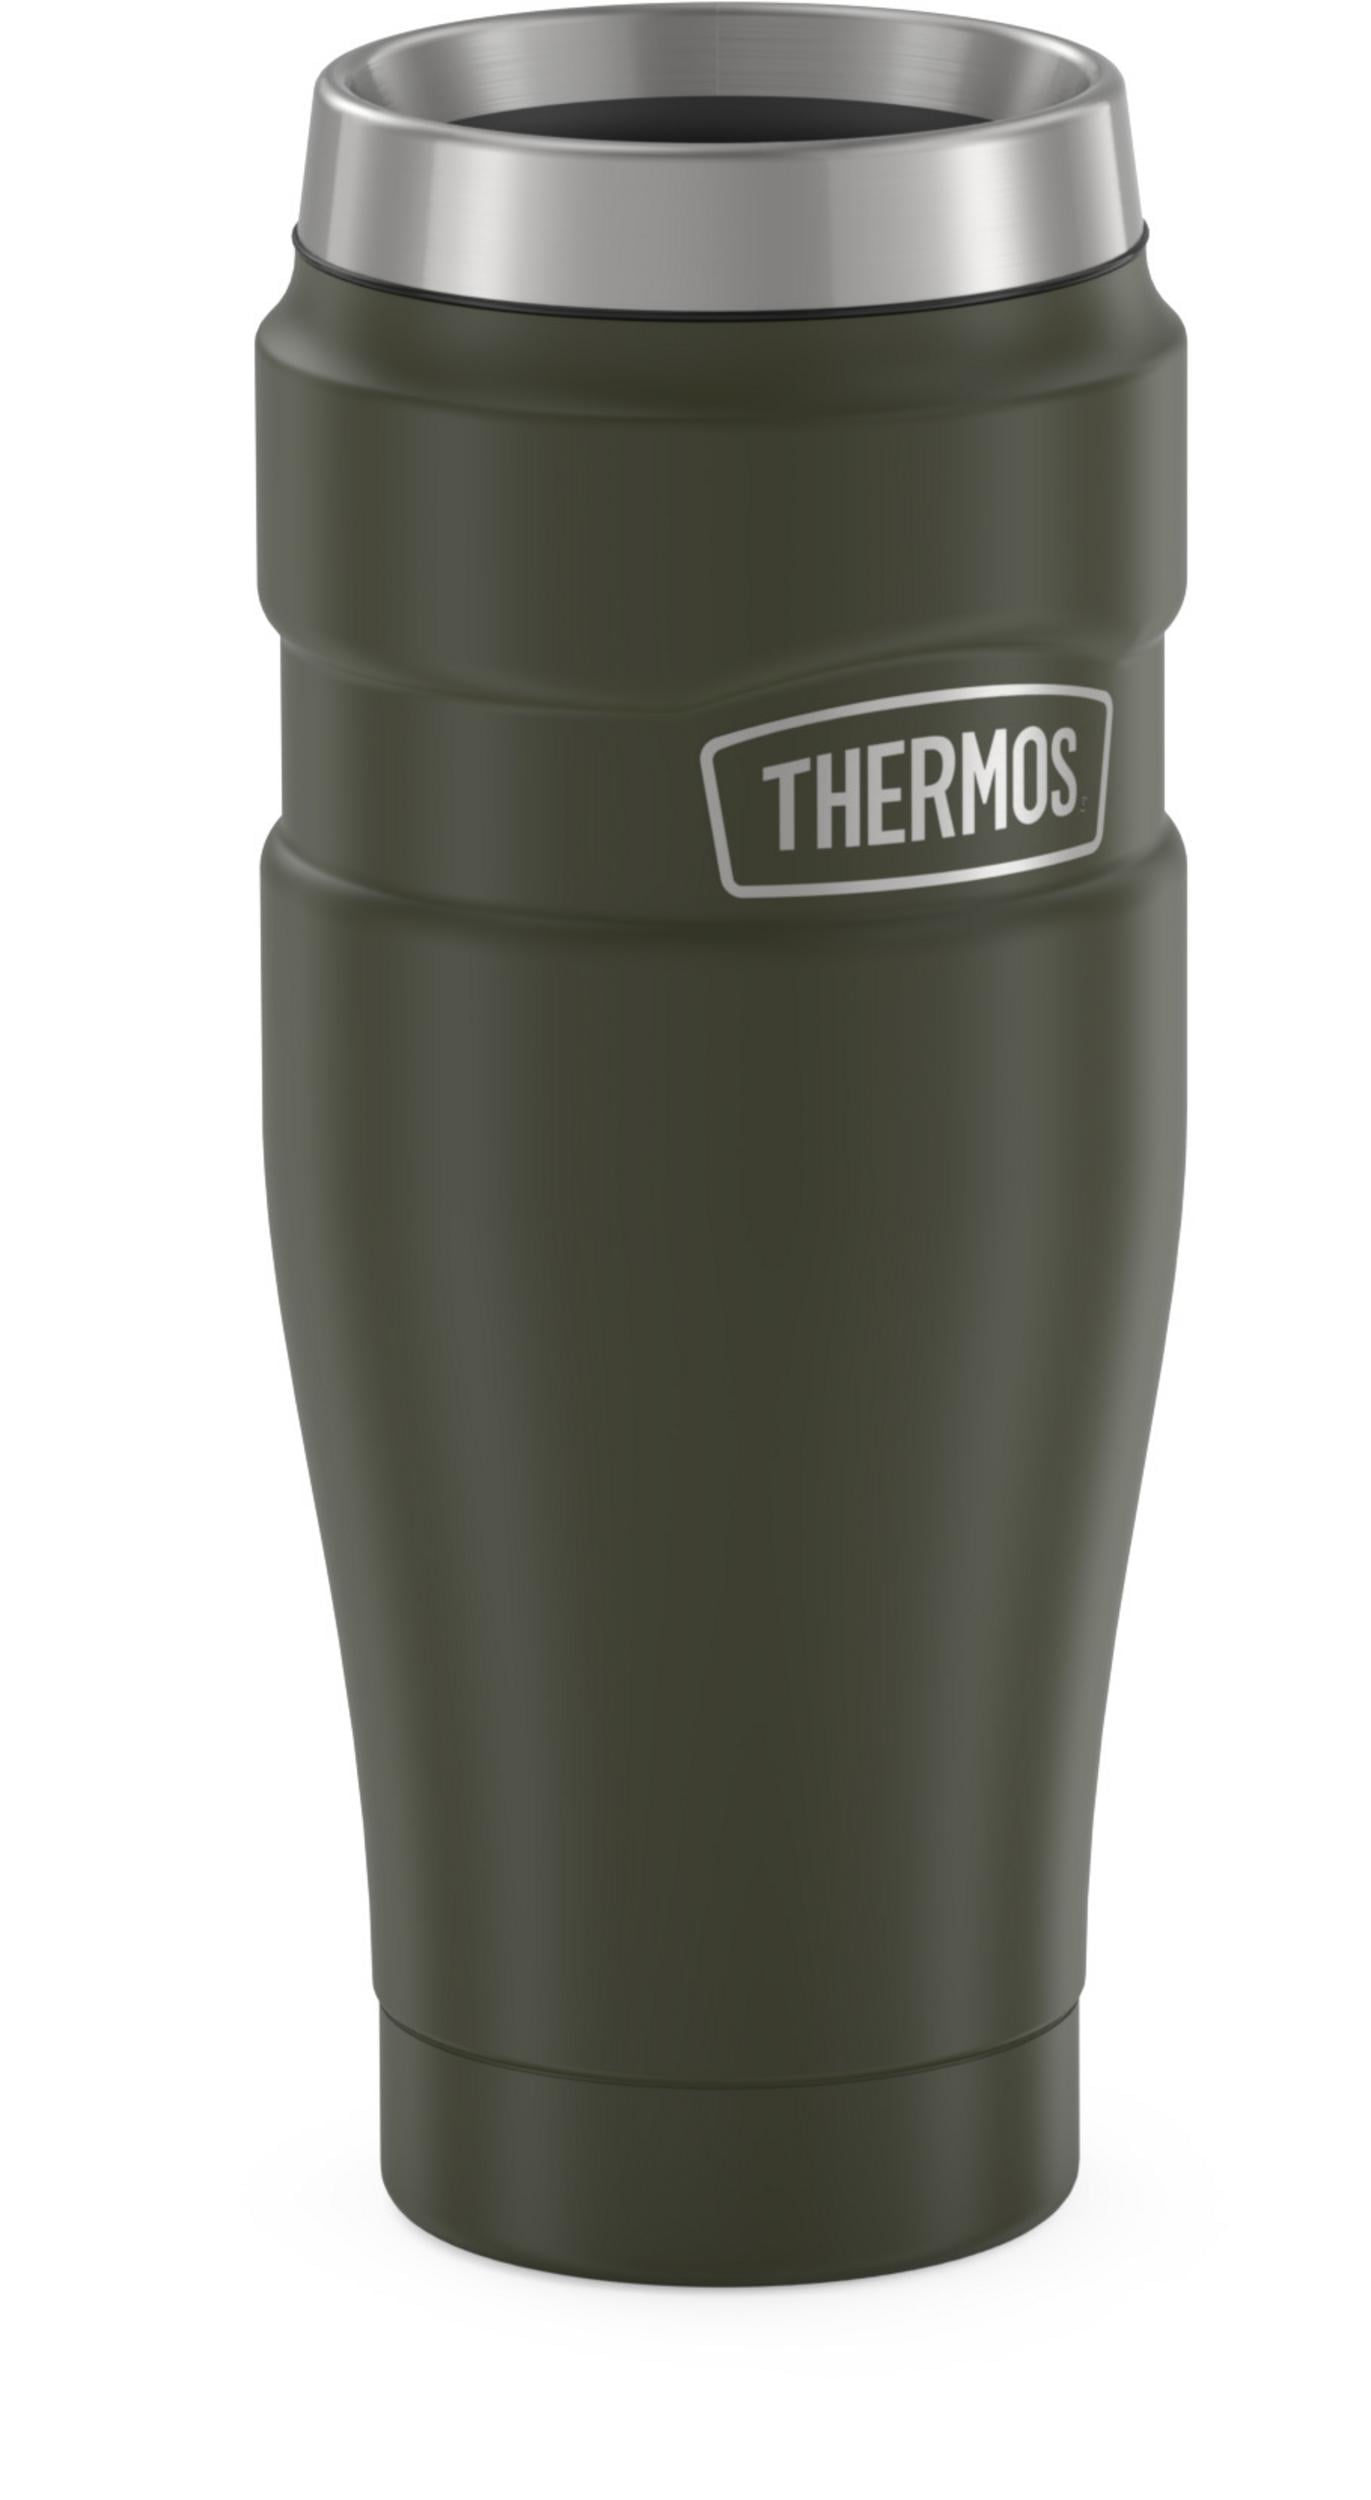 Old South - 16oz Stainless Steel Thermos